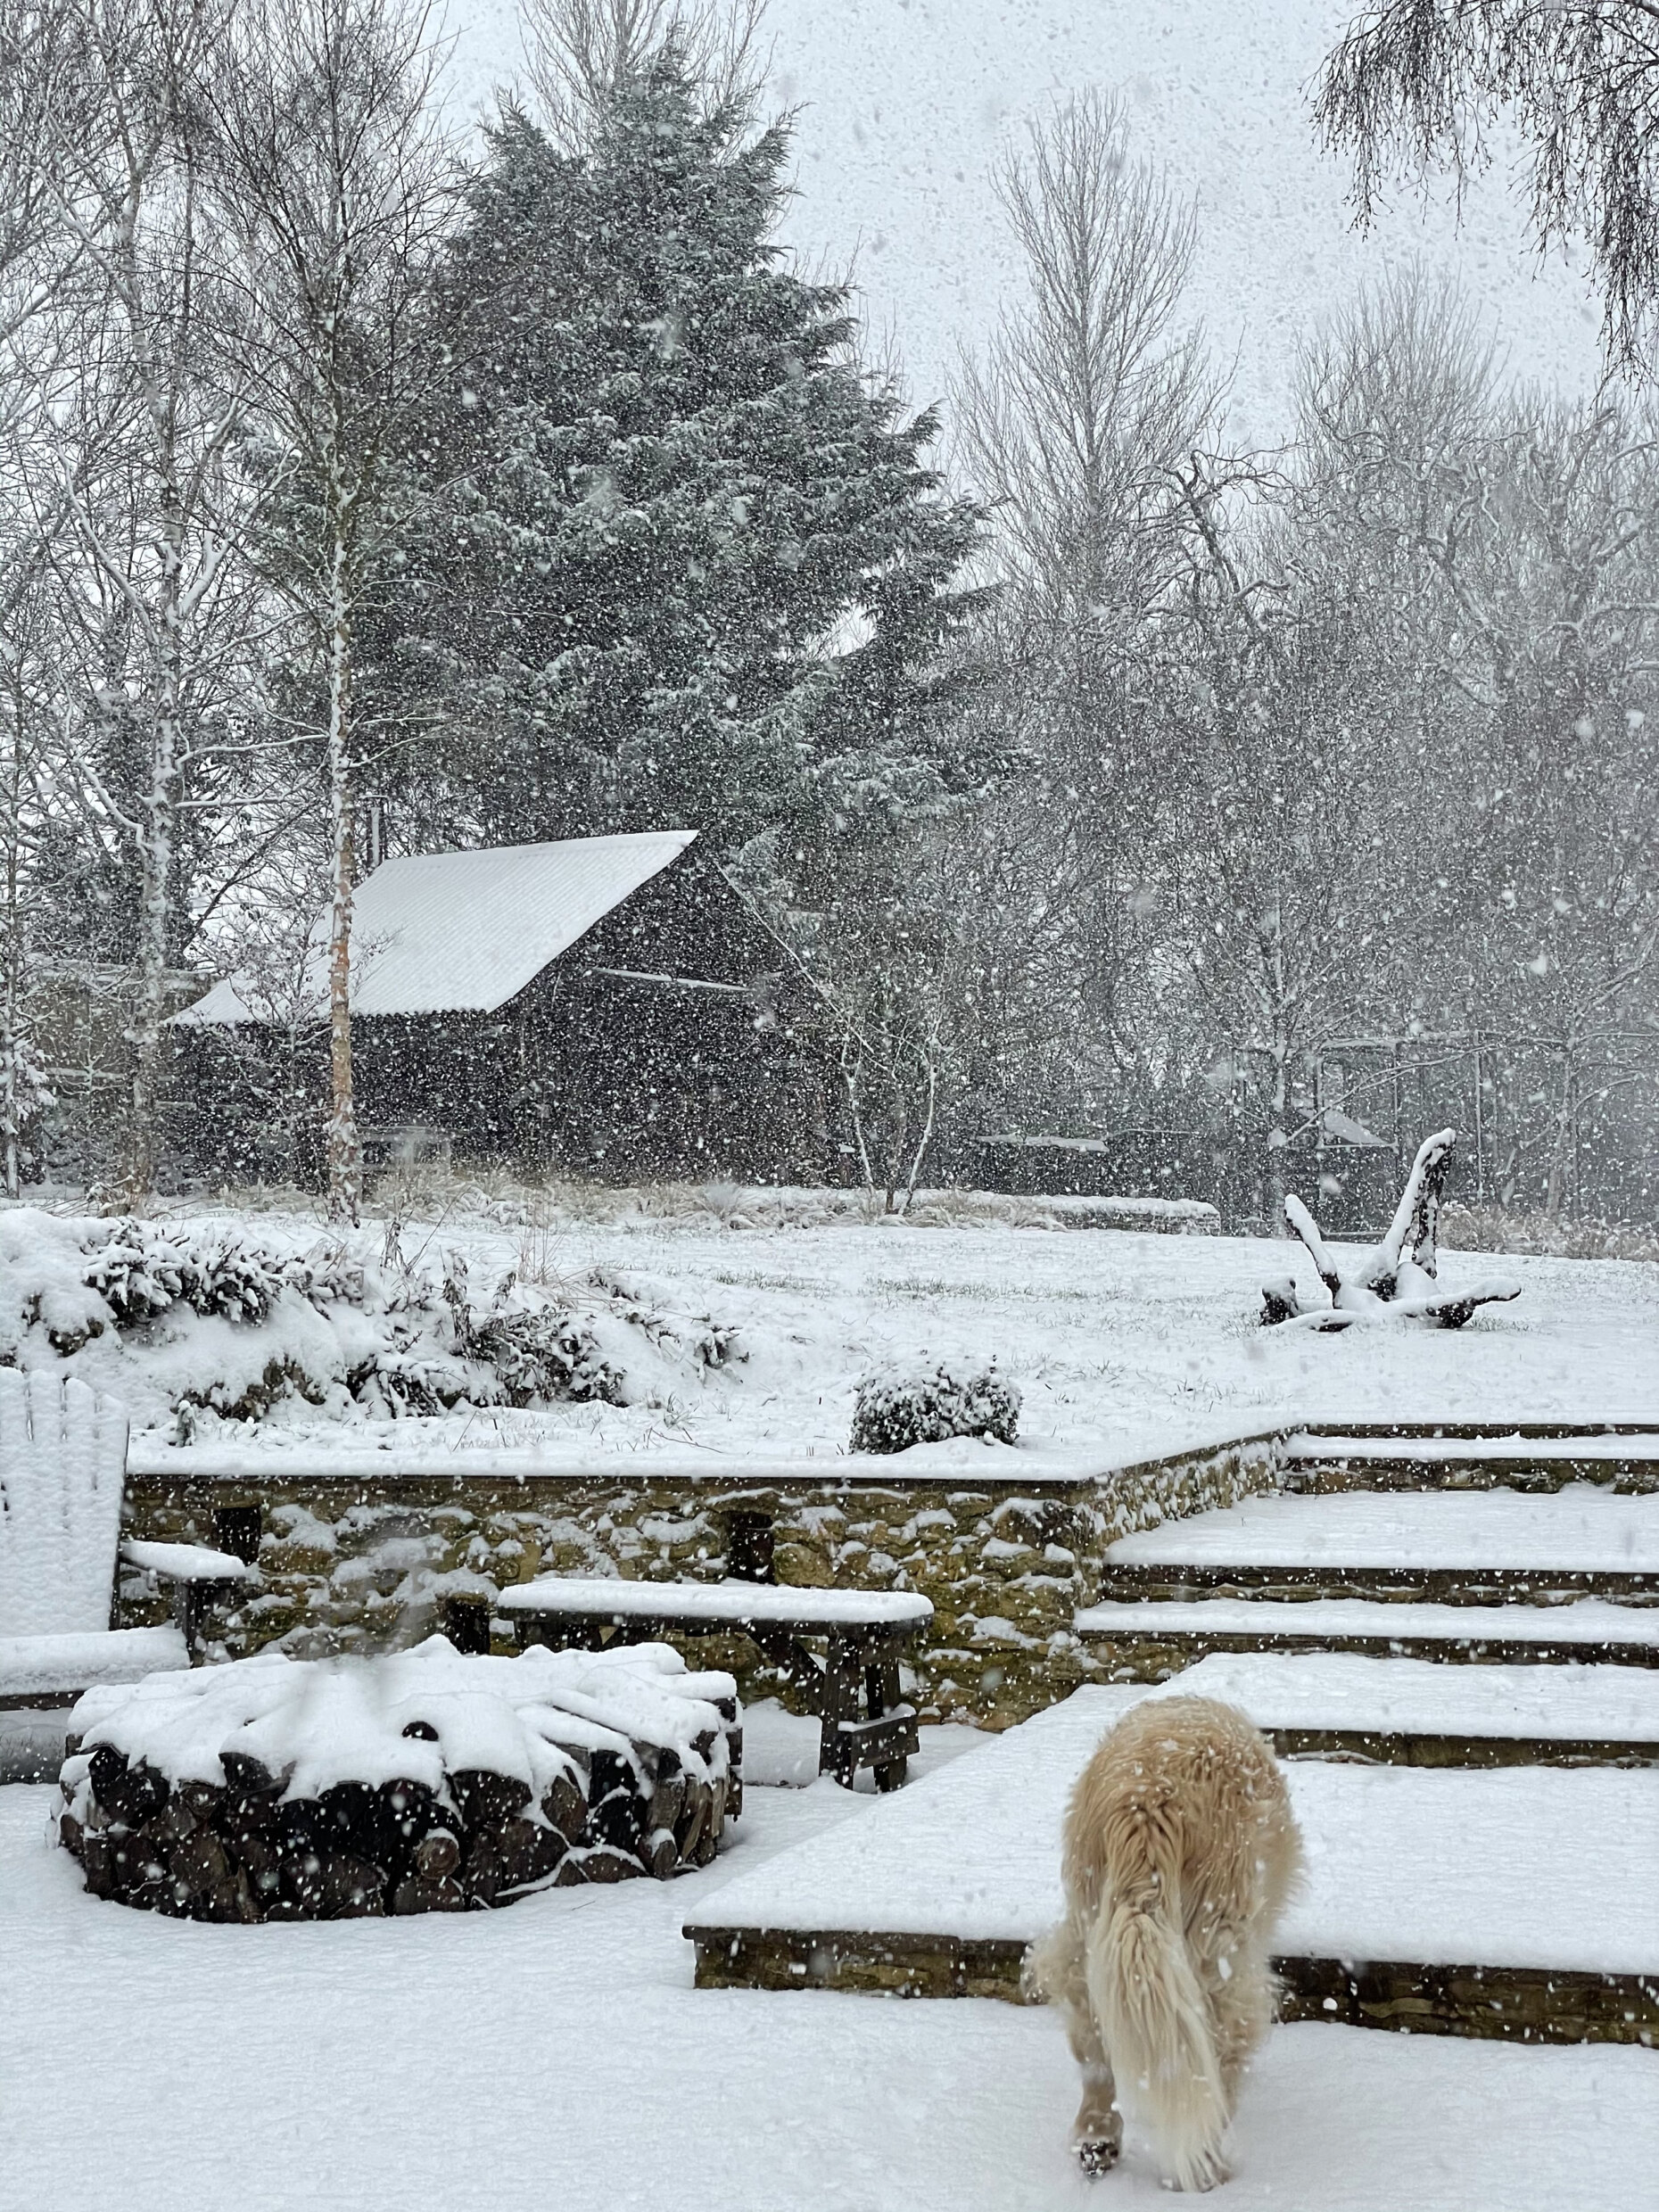 Snow falling on the shack as golden retriever walks up the steps in snowy garden